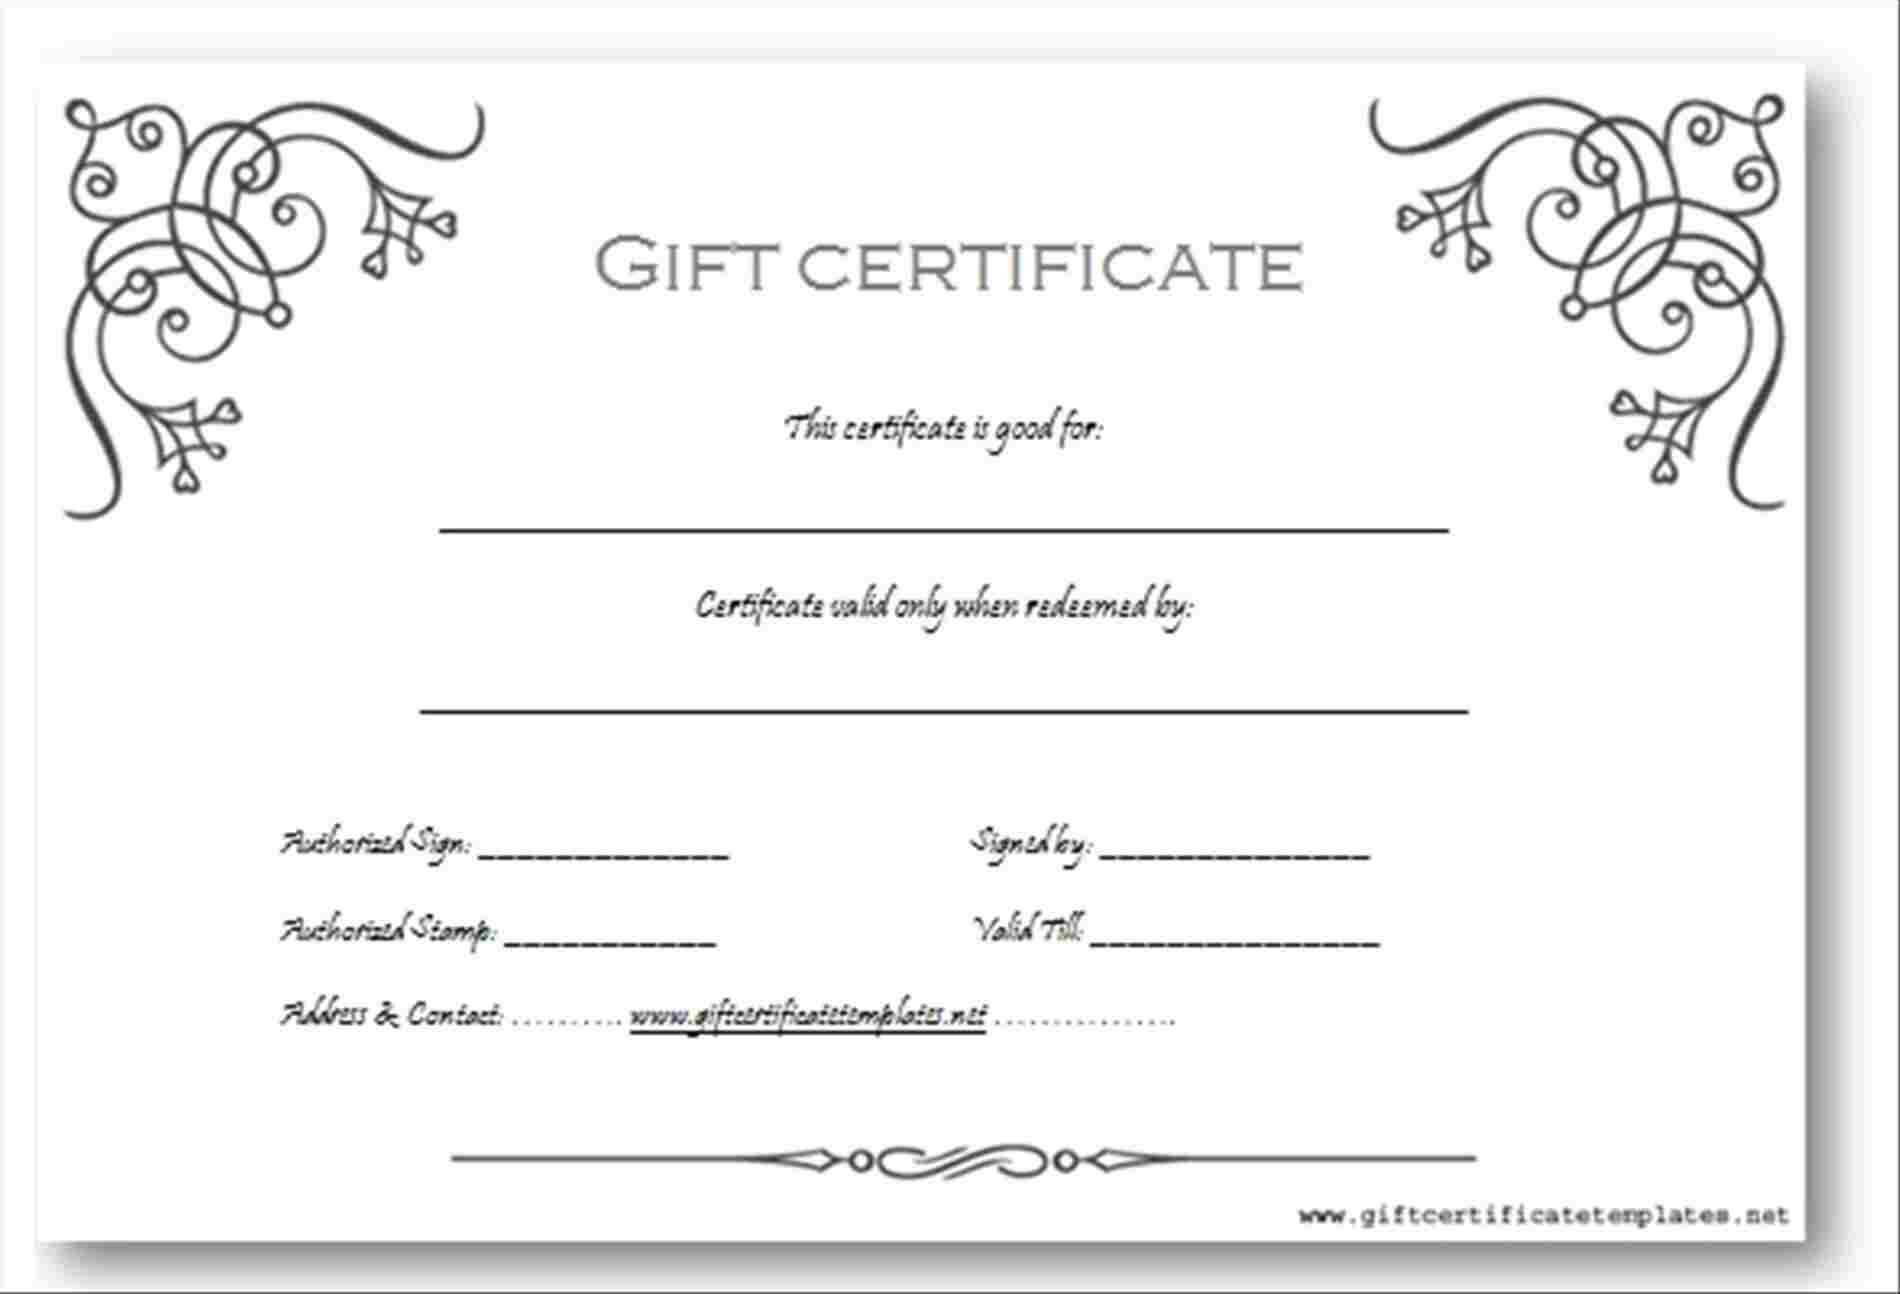 007 Photographer Gift Certificate Template Free Photography For Free Photography Gift Certificate Template